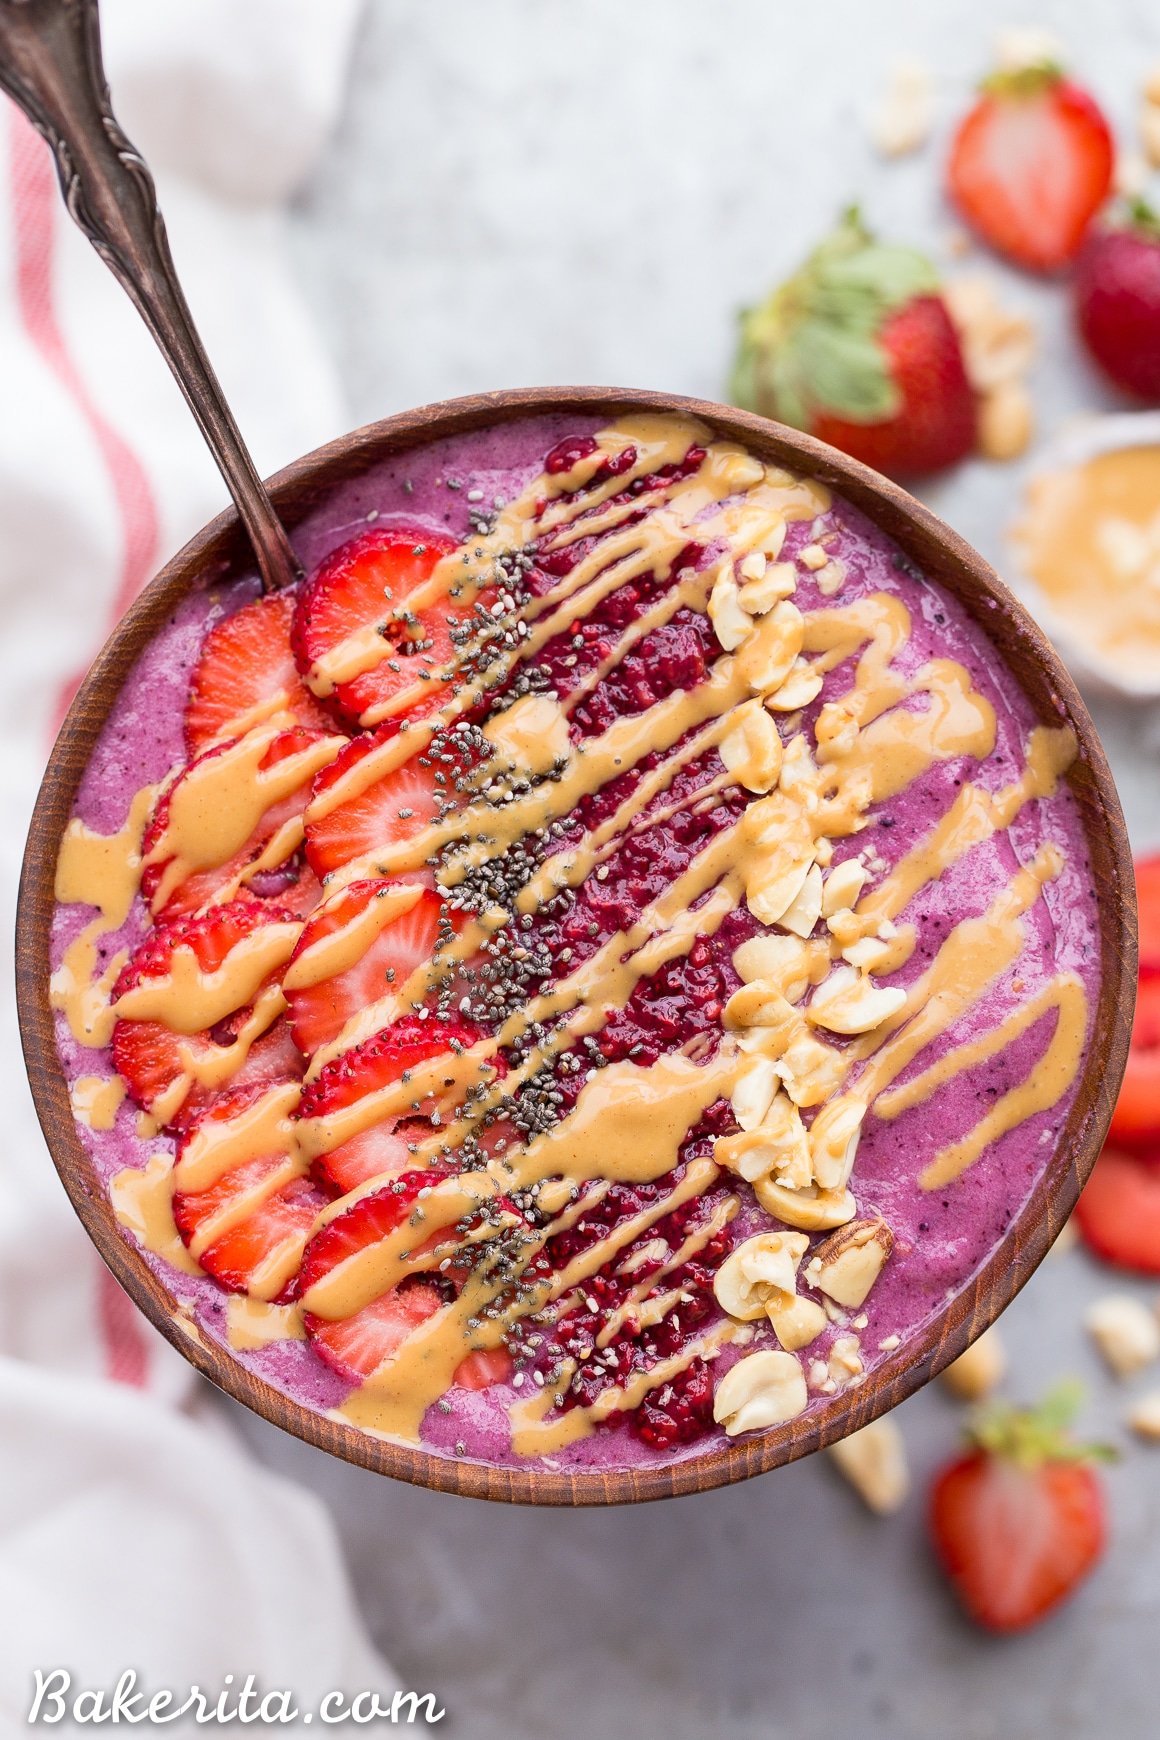 This Peanut Butter & Jelly Smoothie Bowl is smooth, creamy, and delicious - the flavors will bring you right back to your favorite childhood sandwich. This gluten-free and vegan breakfast bowl has a secret vegetable ingredient packed in too - shhh!